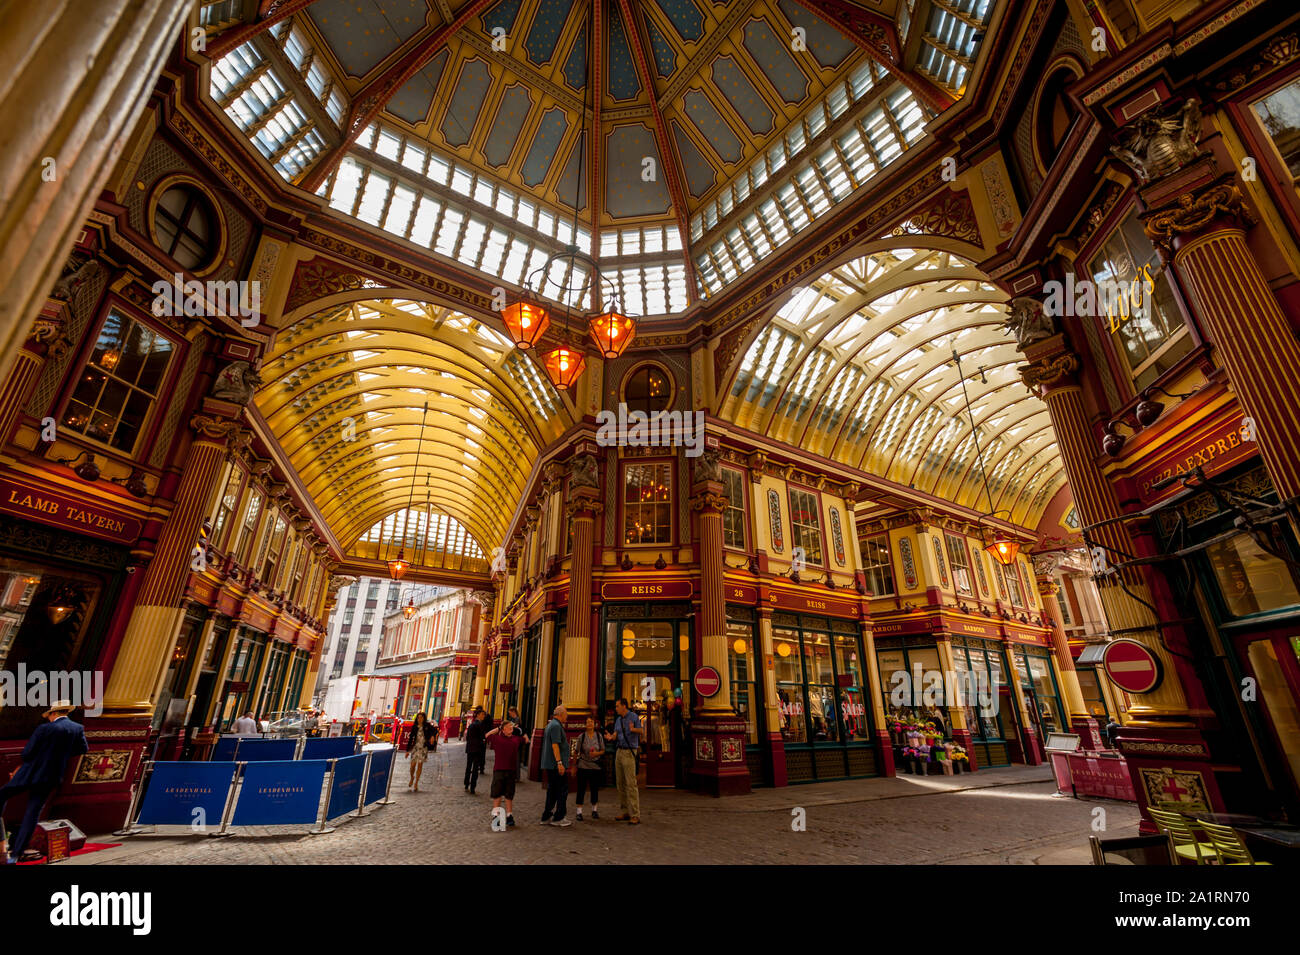 The central interior of Leadenhall Market in the city of London Stock Photo